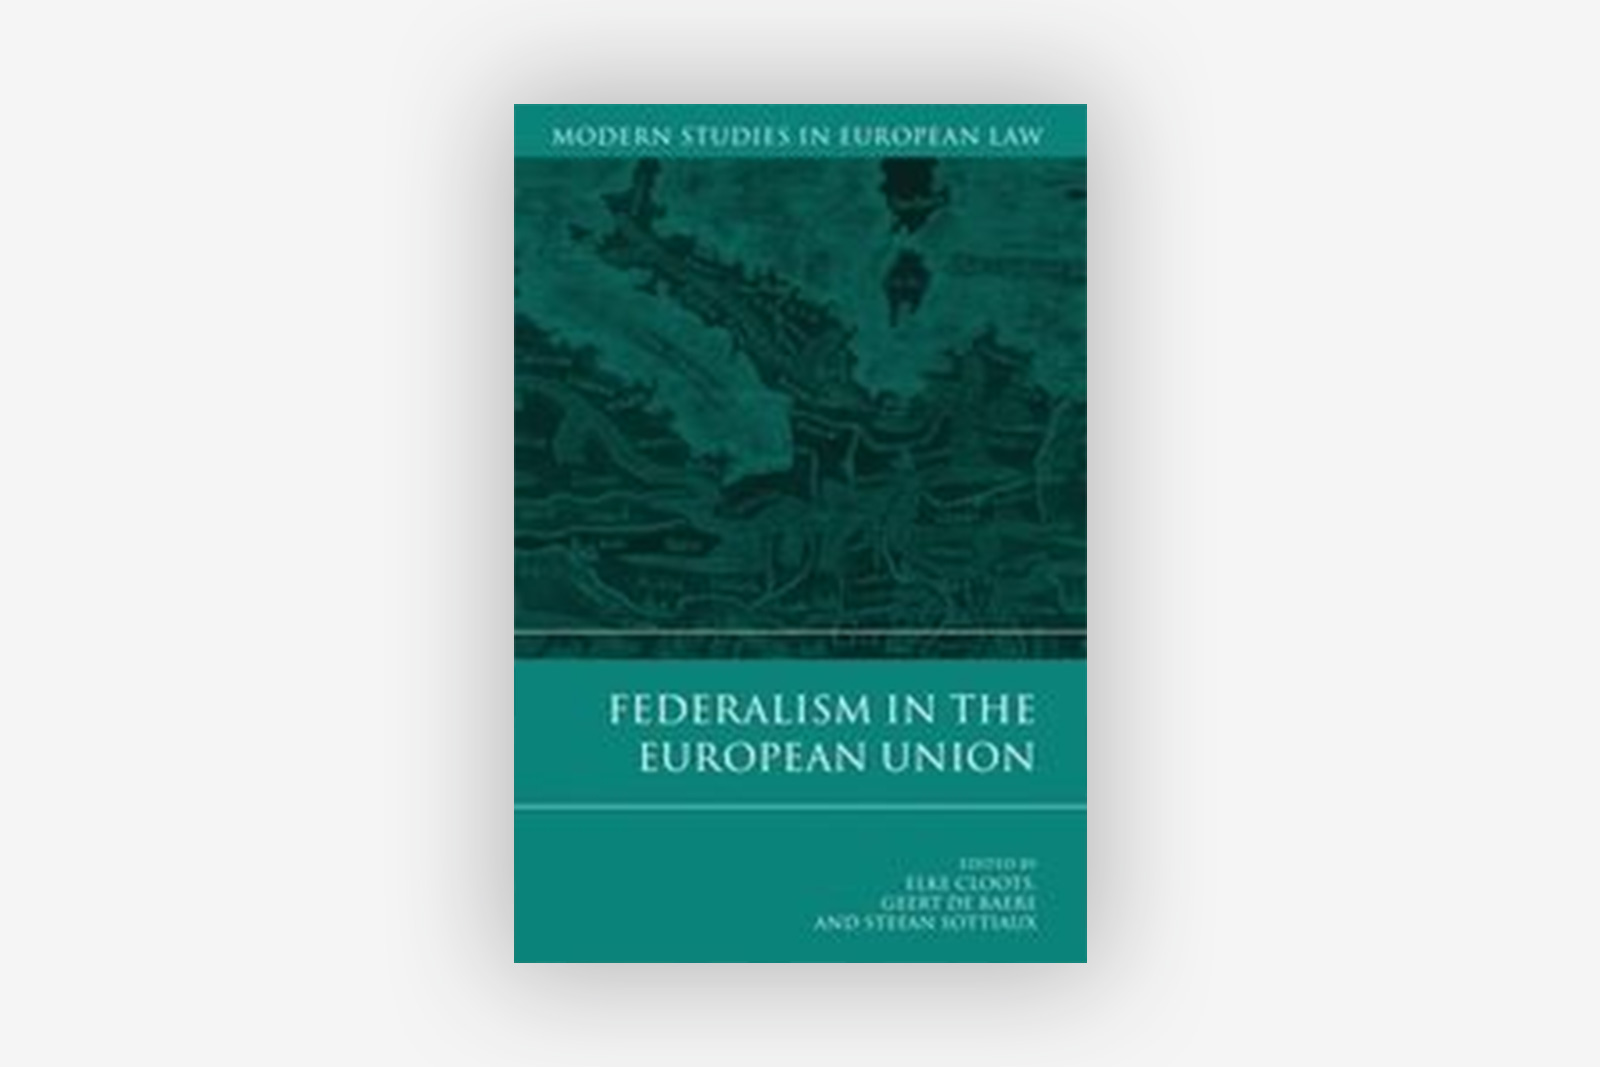 Federalism in the European Union (2012)